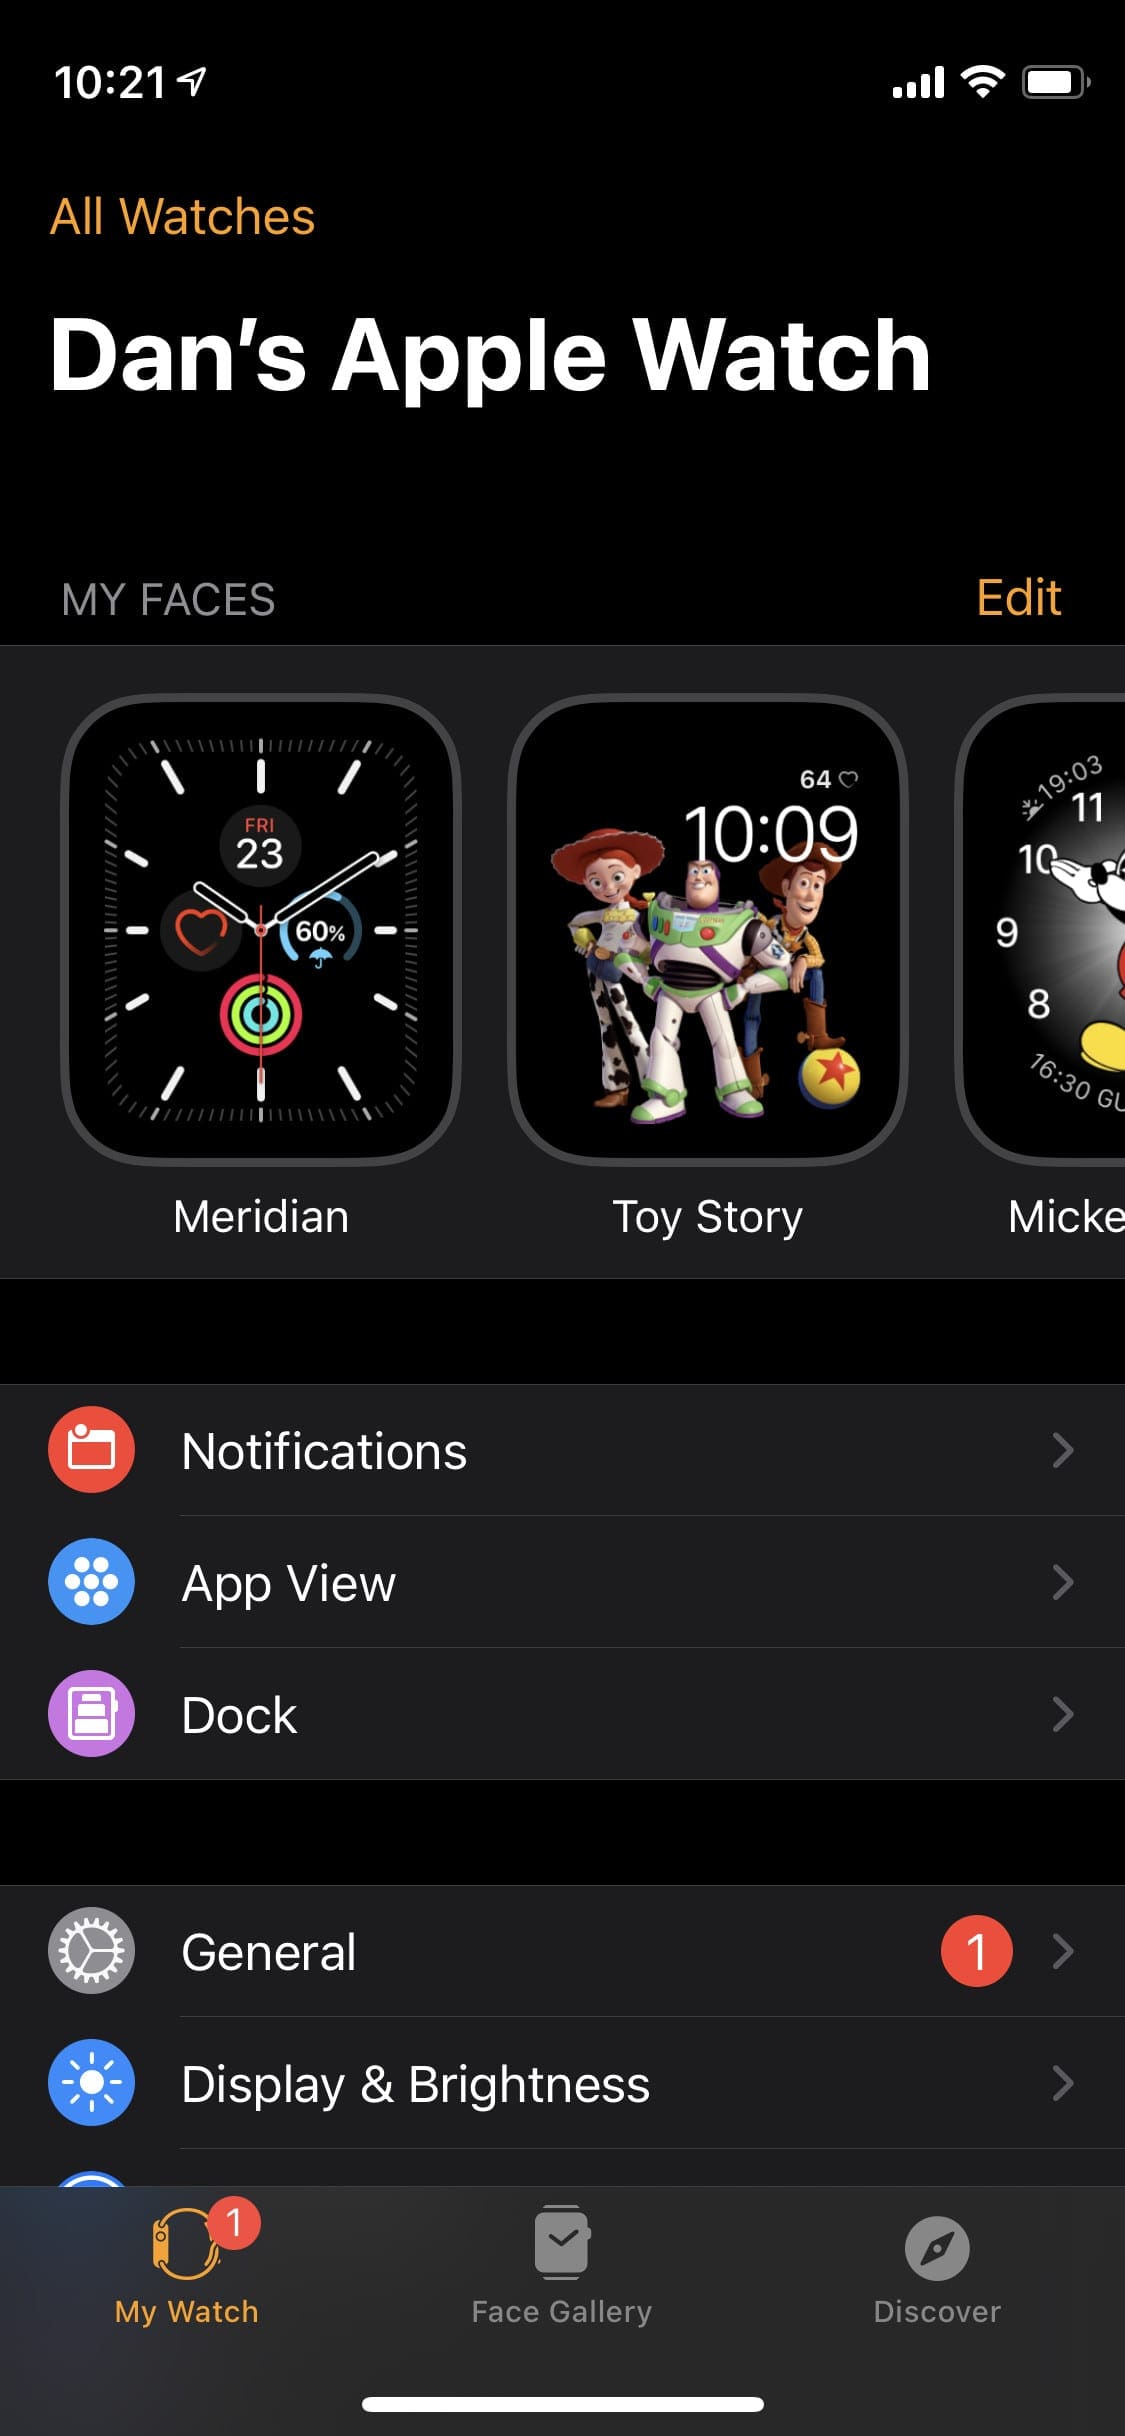 My Watch tab in Watch app on iPhone.